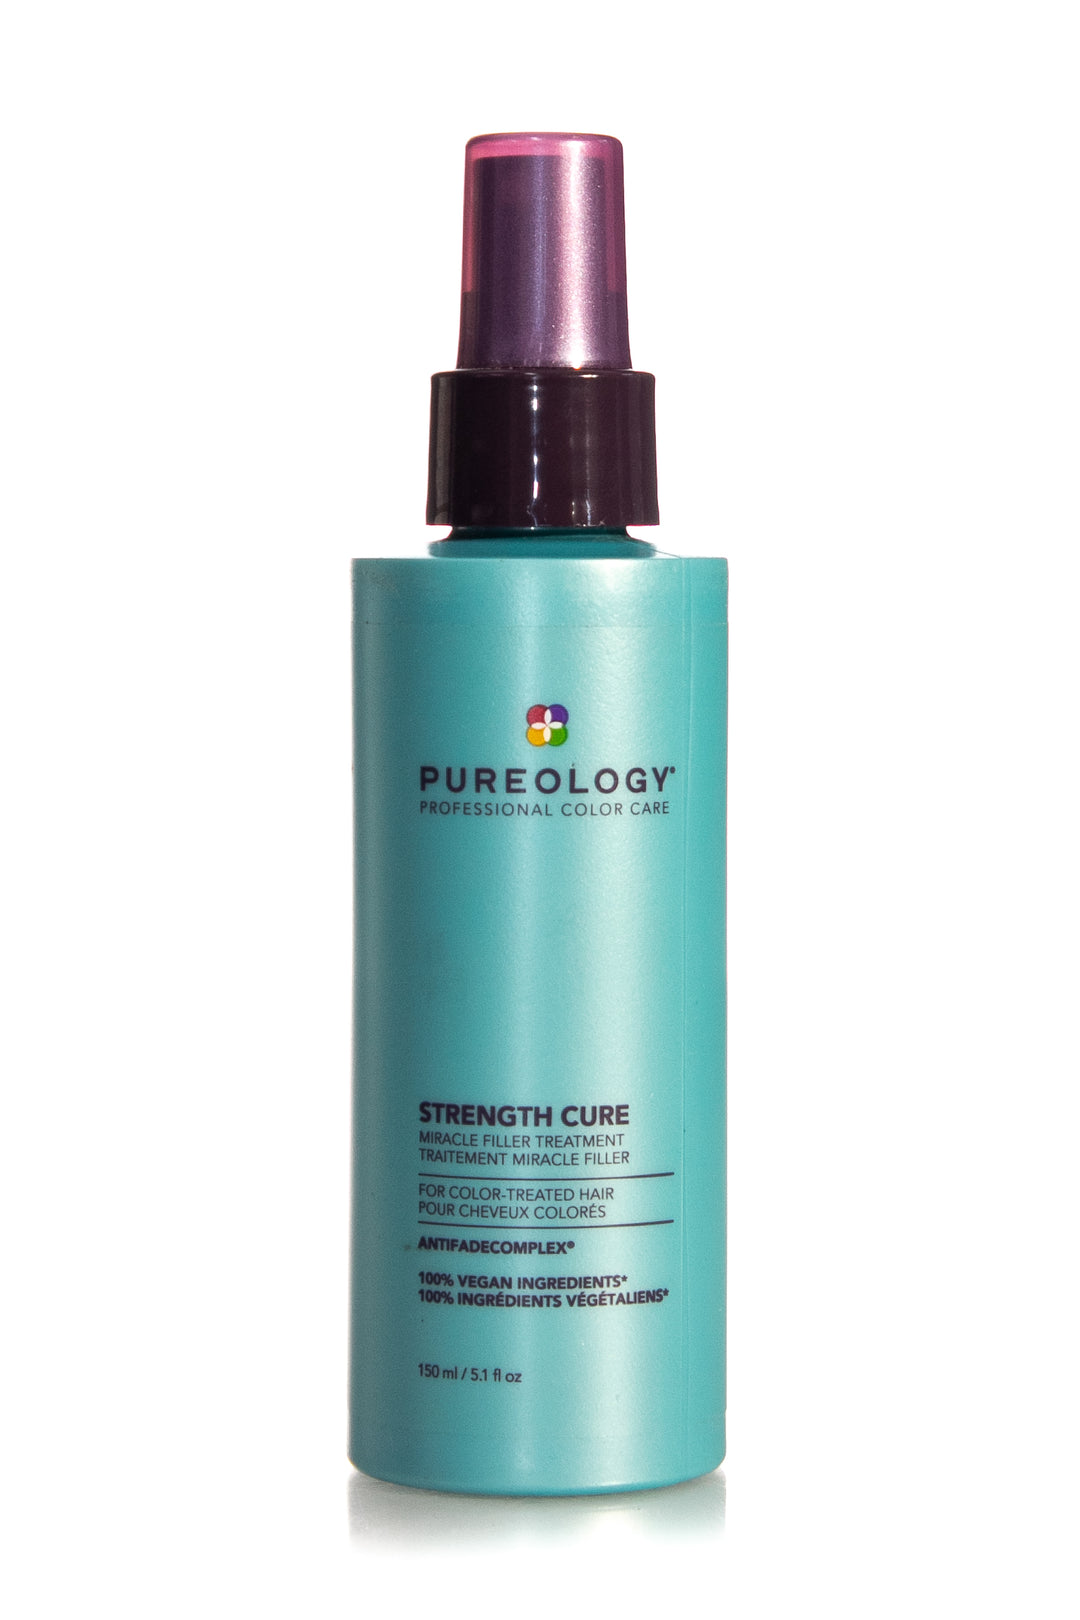 PUREOLOGY Strength Cure Miracle Filler Treatment | 150ml